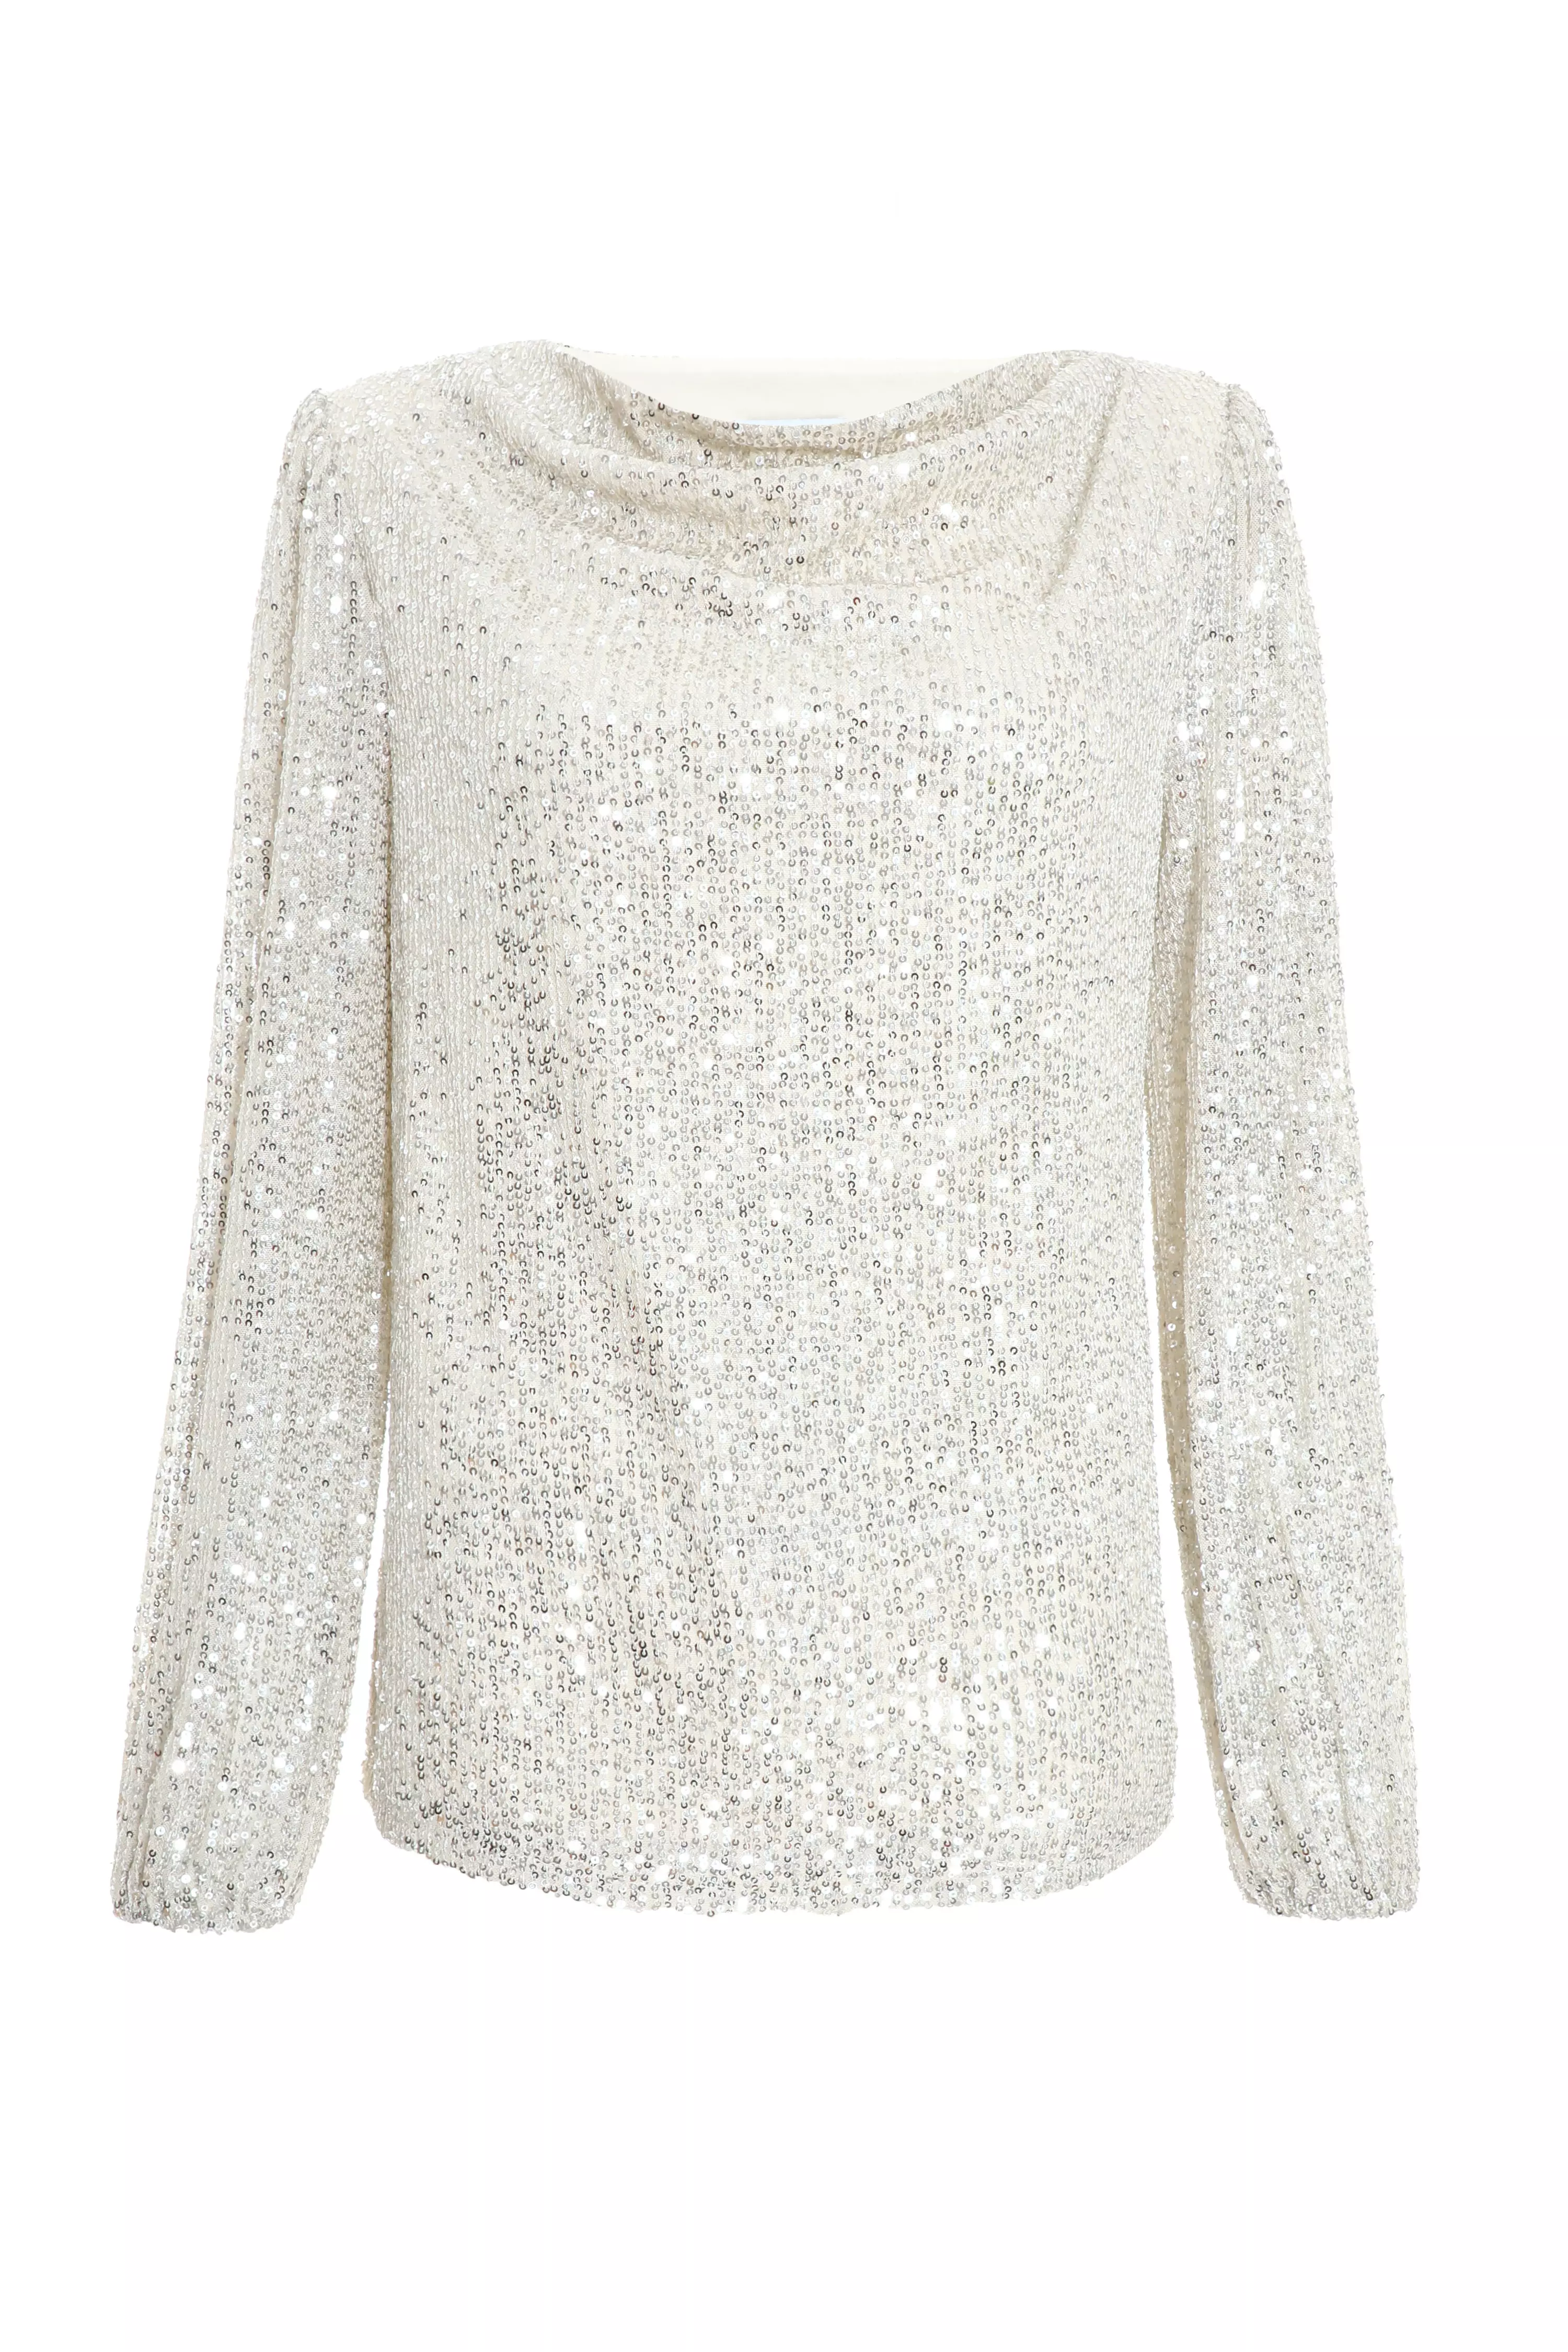 Champagne Sequin Boxy Drape Top - QUIZ Clothing